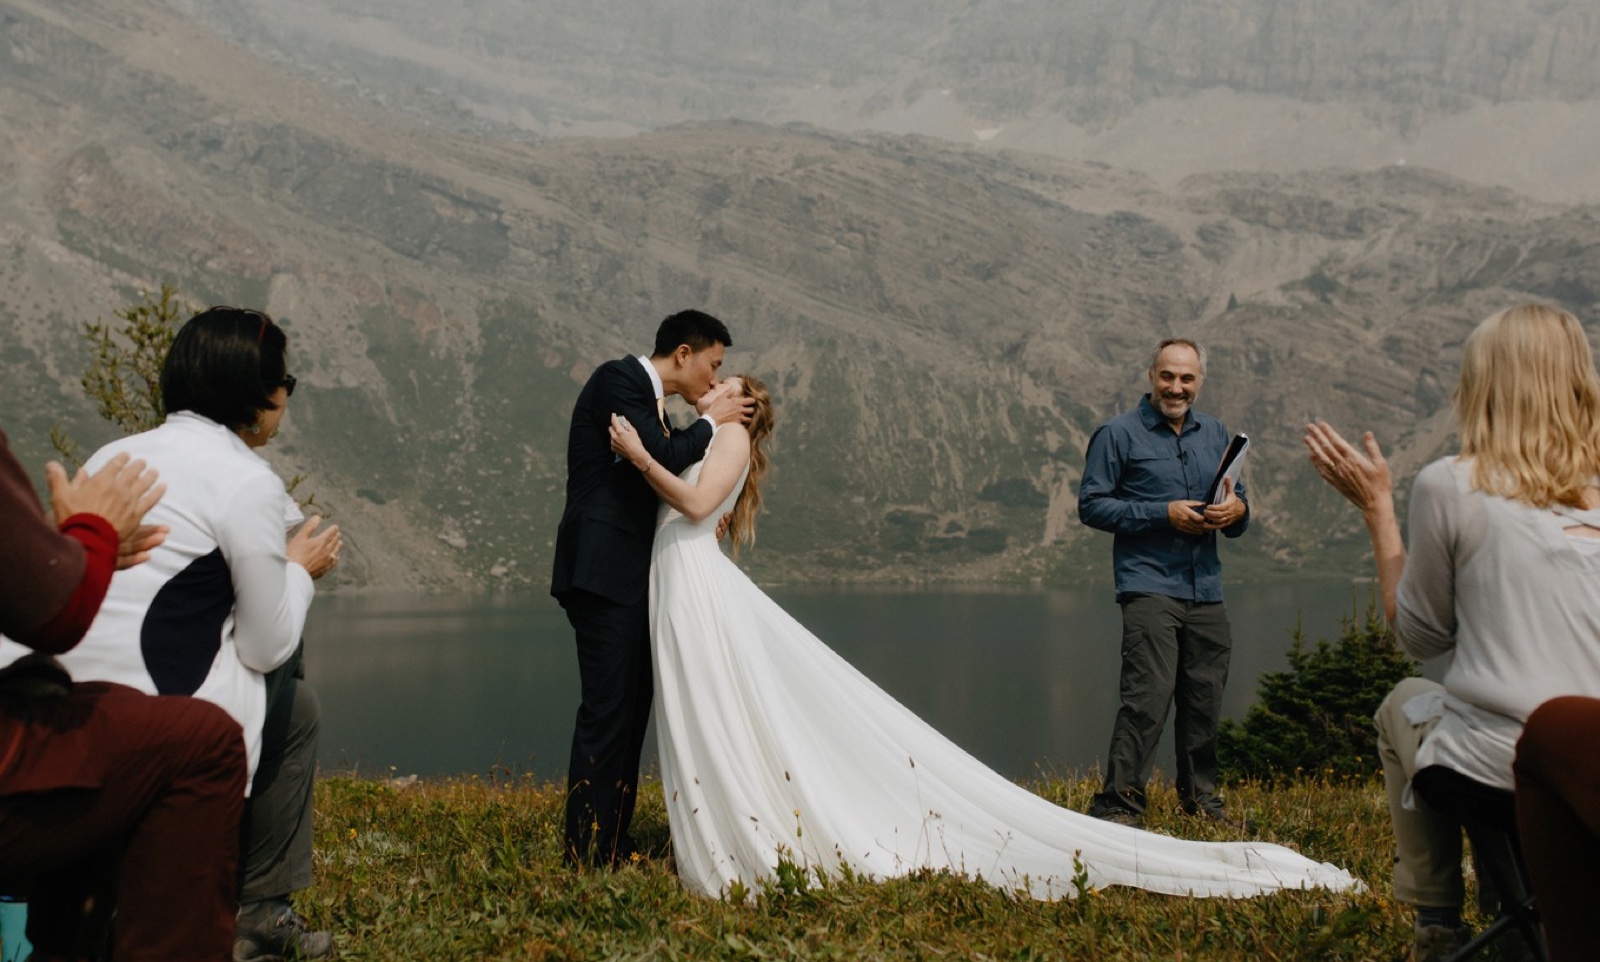 Couple epically kissing at their lakeshore wedding ceremony overlooking glacial Hidden Lake near Skoki Lodge